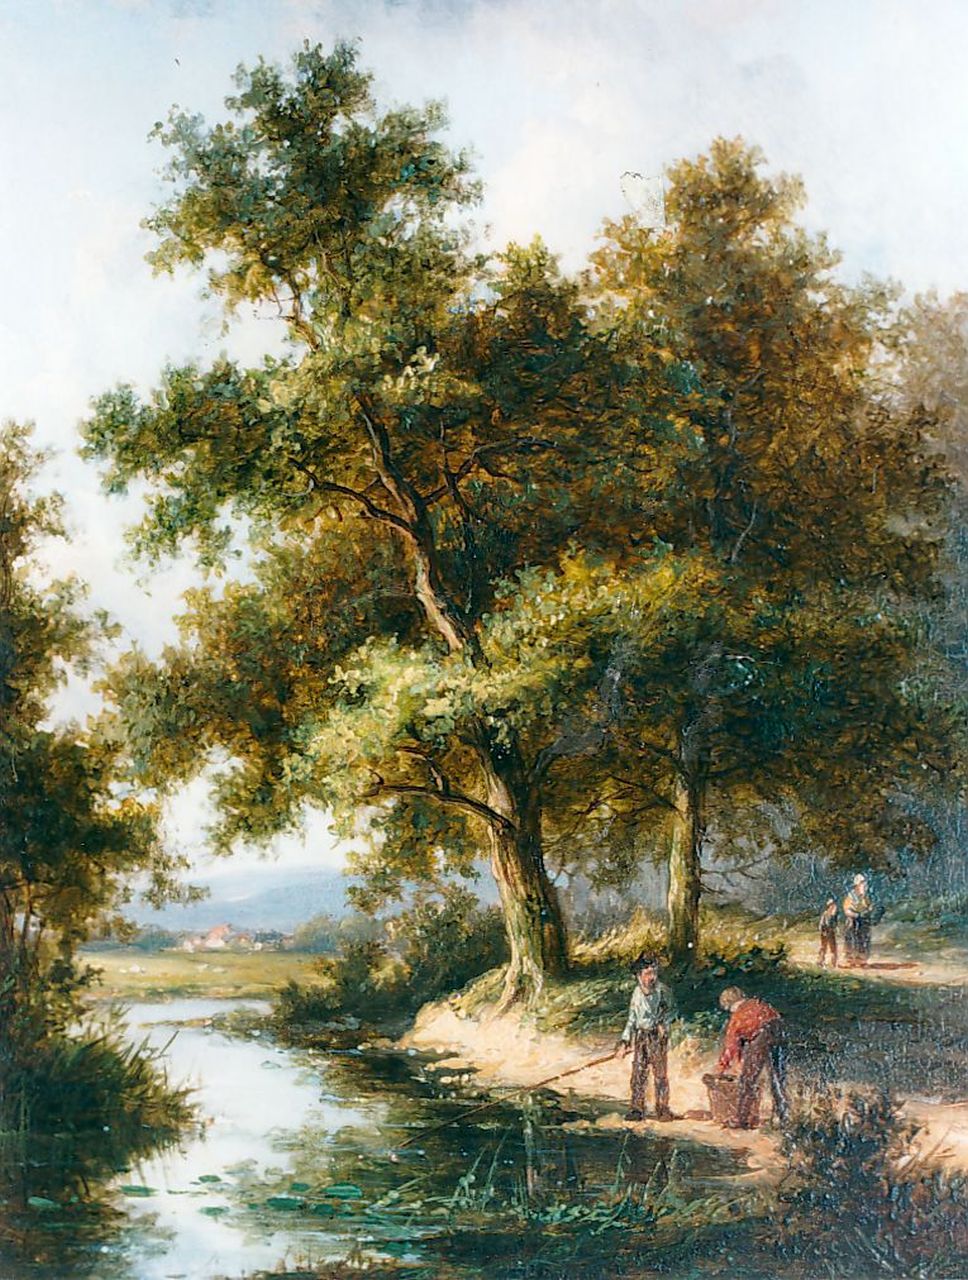 Morel II J.E.  | Jan Evert Morel II, Anglers in a forest landscape, oil on panel 18.1 x 13.8 cm, signed on the reverse and dated 1874